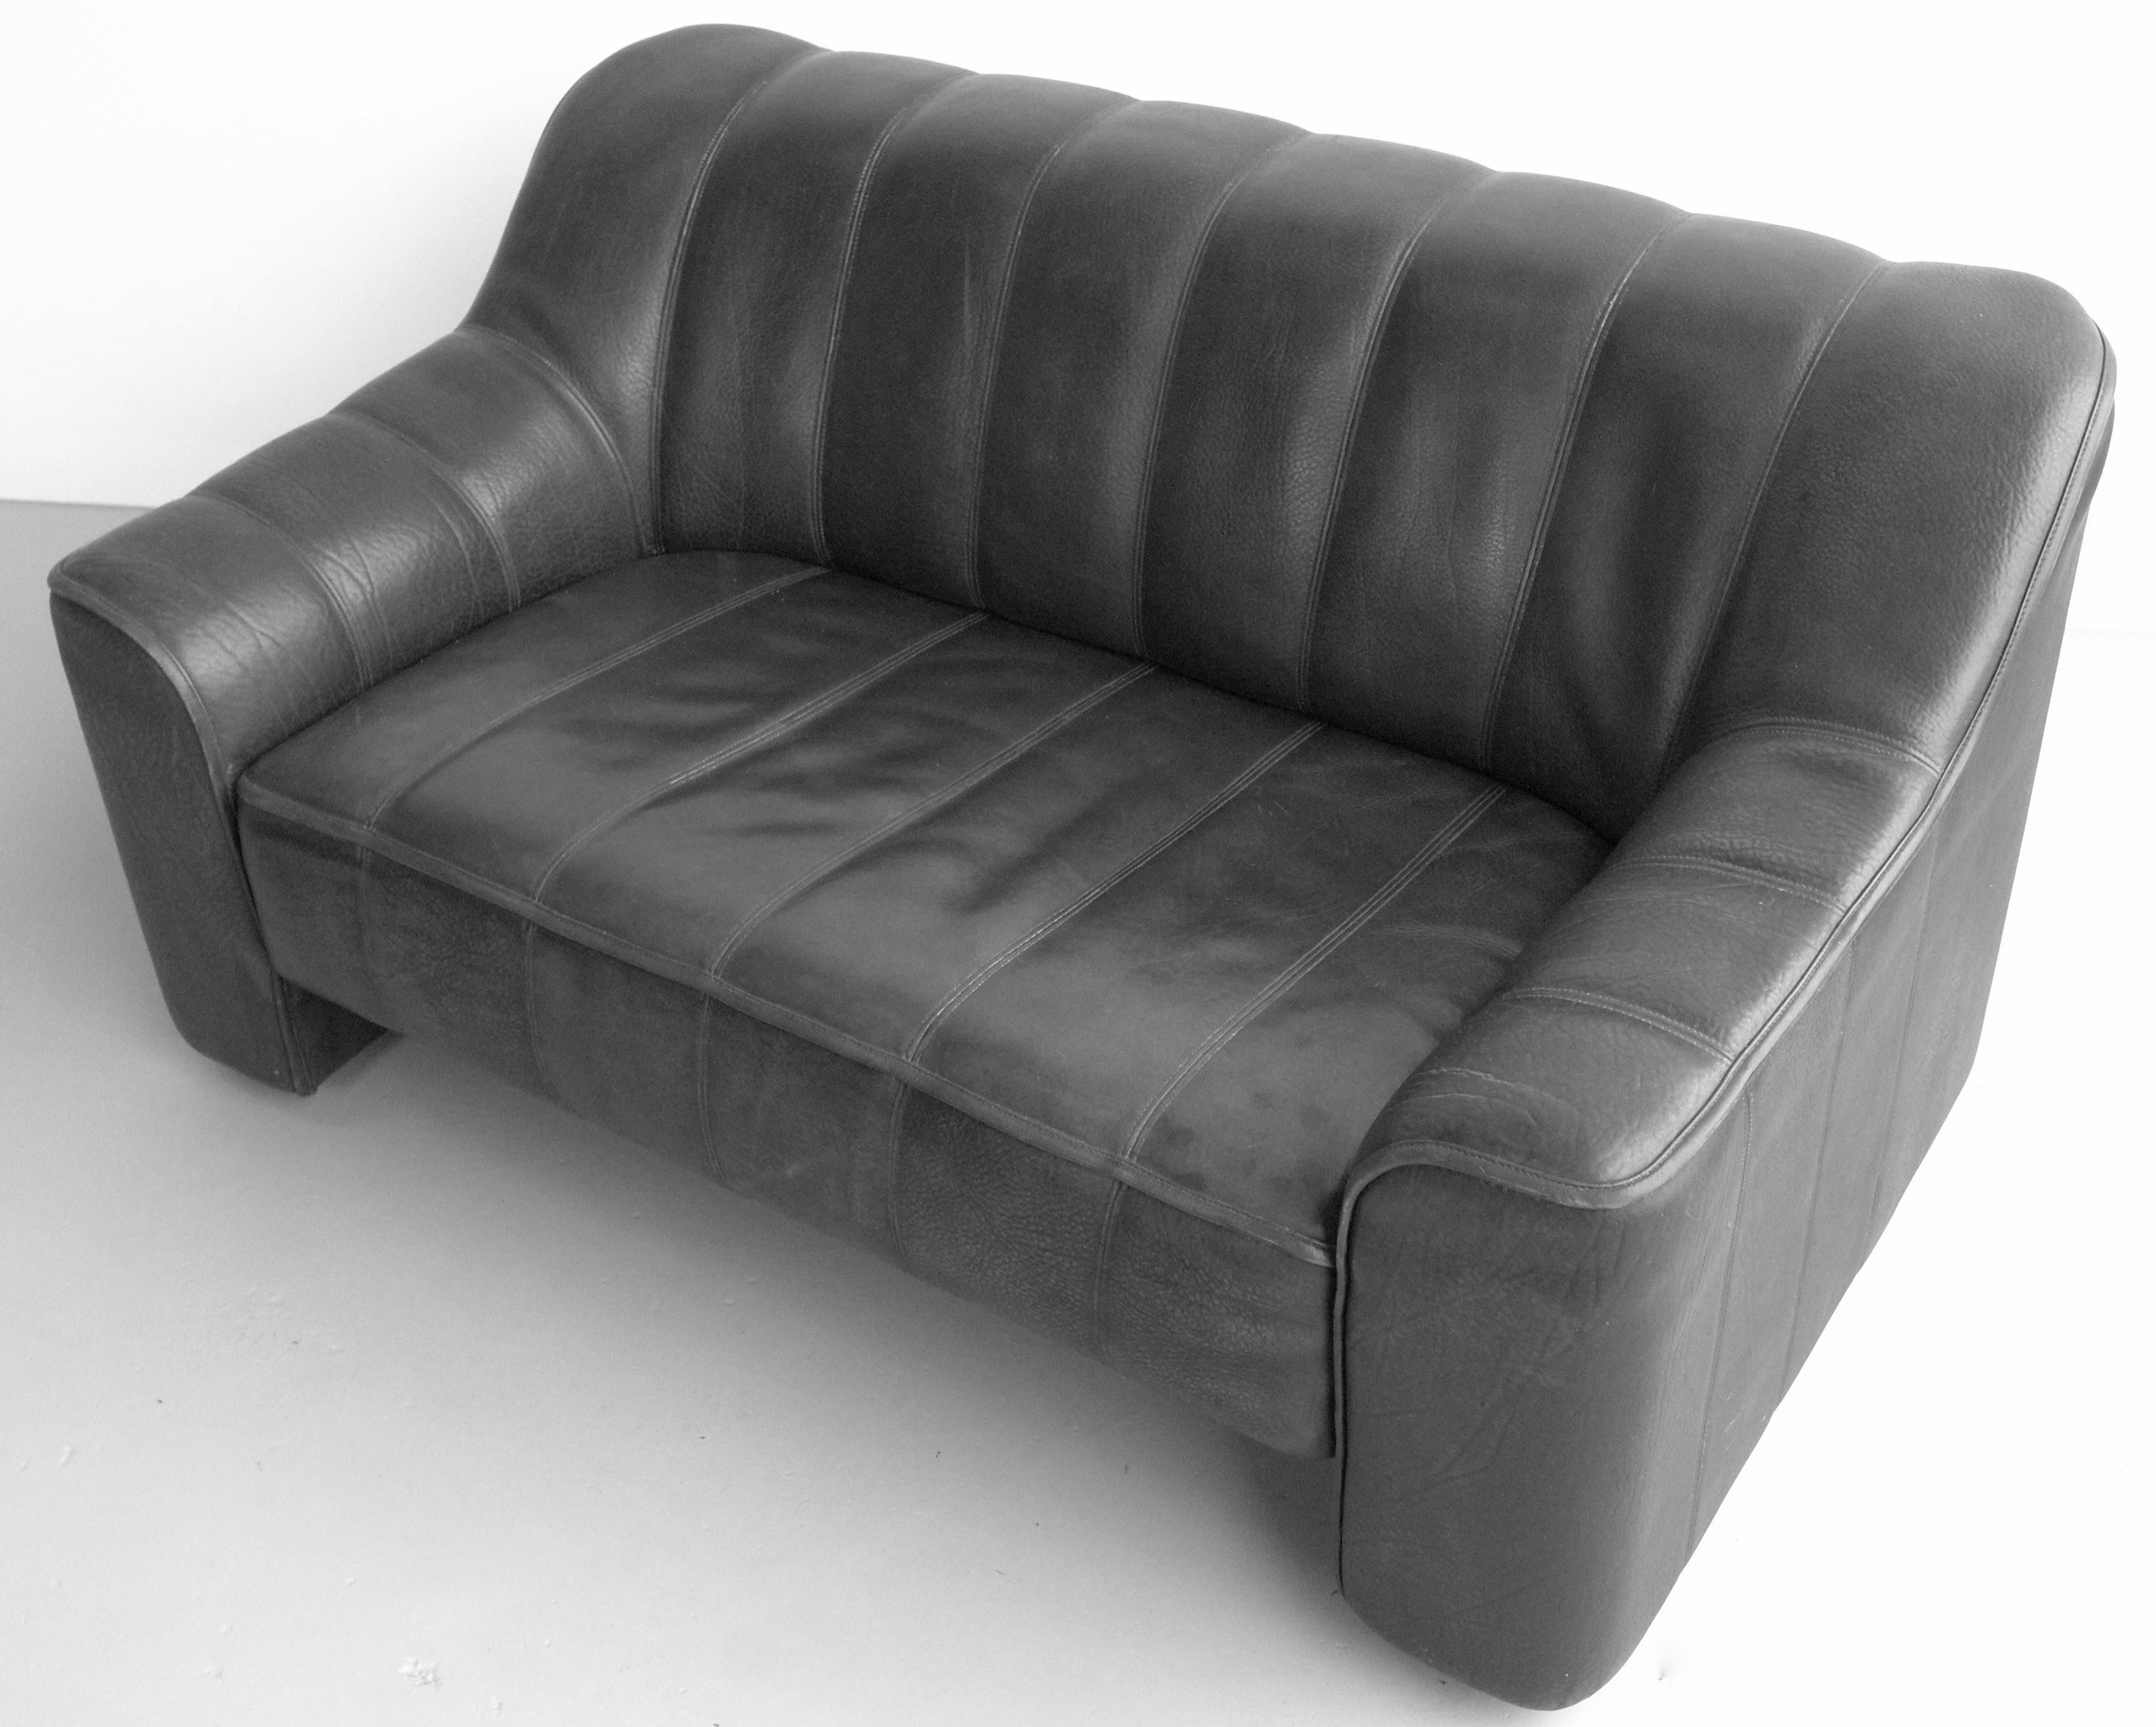 De Sede black leather DS44 two-seat sofa. Upholstered in thick buffalo black leather. Two adjustable seat positions, you can pullout / pull-out and extend the seat. Made in Switzerland, 1970s.